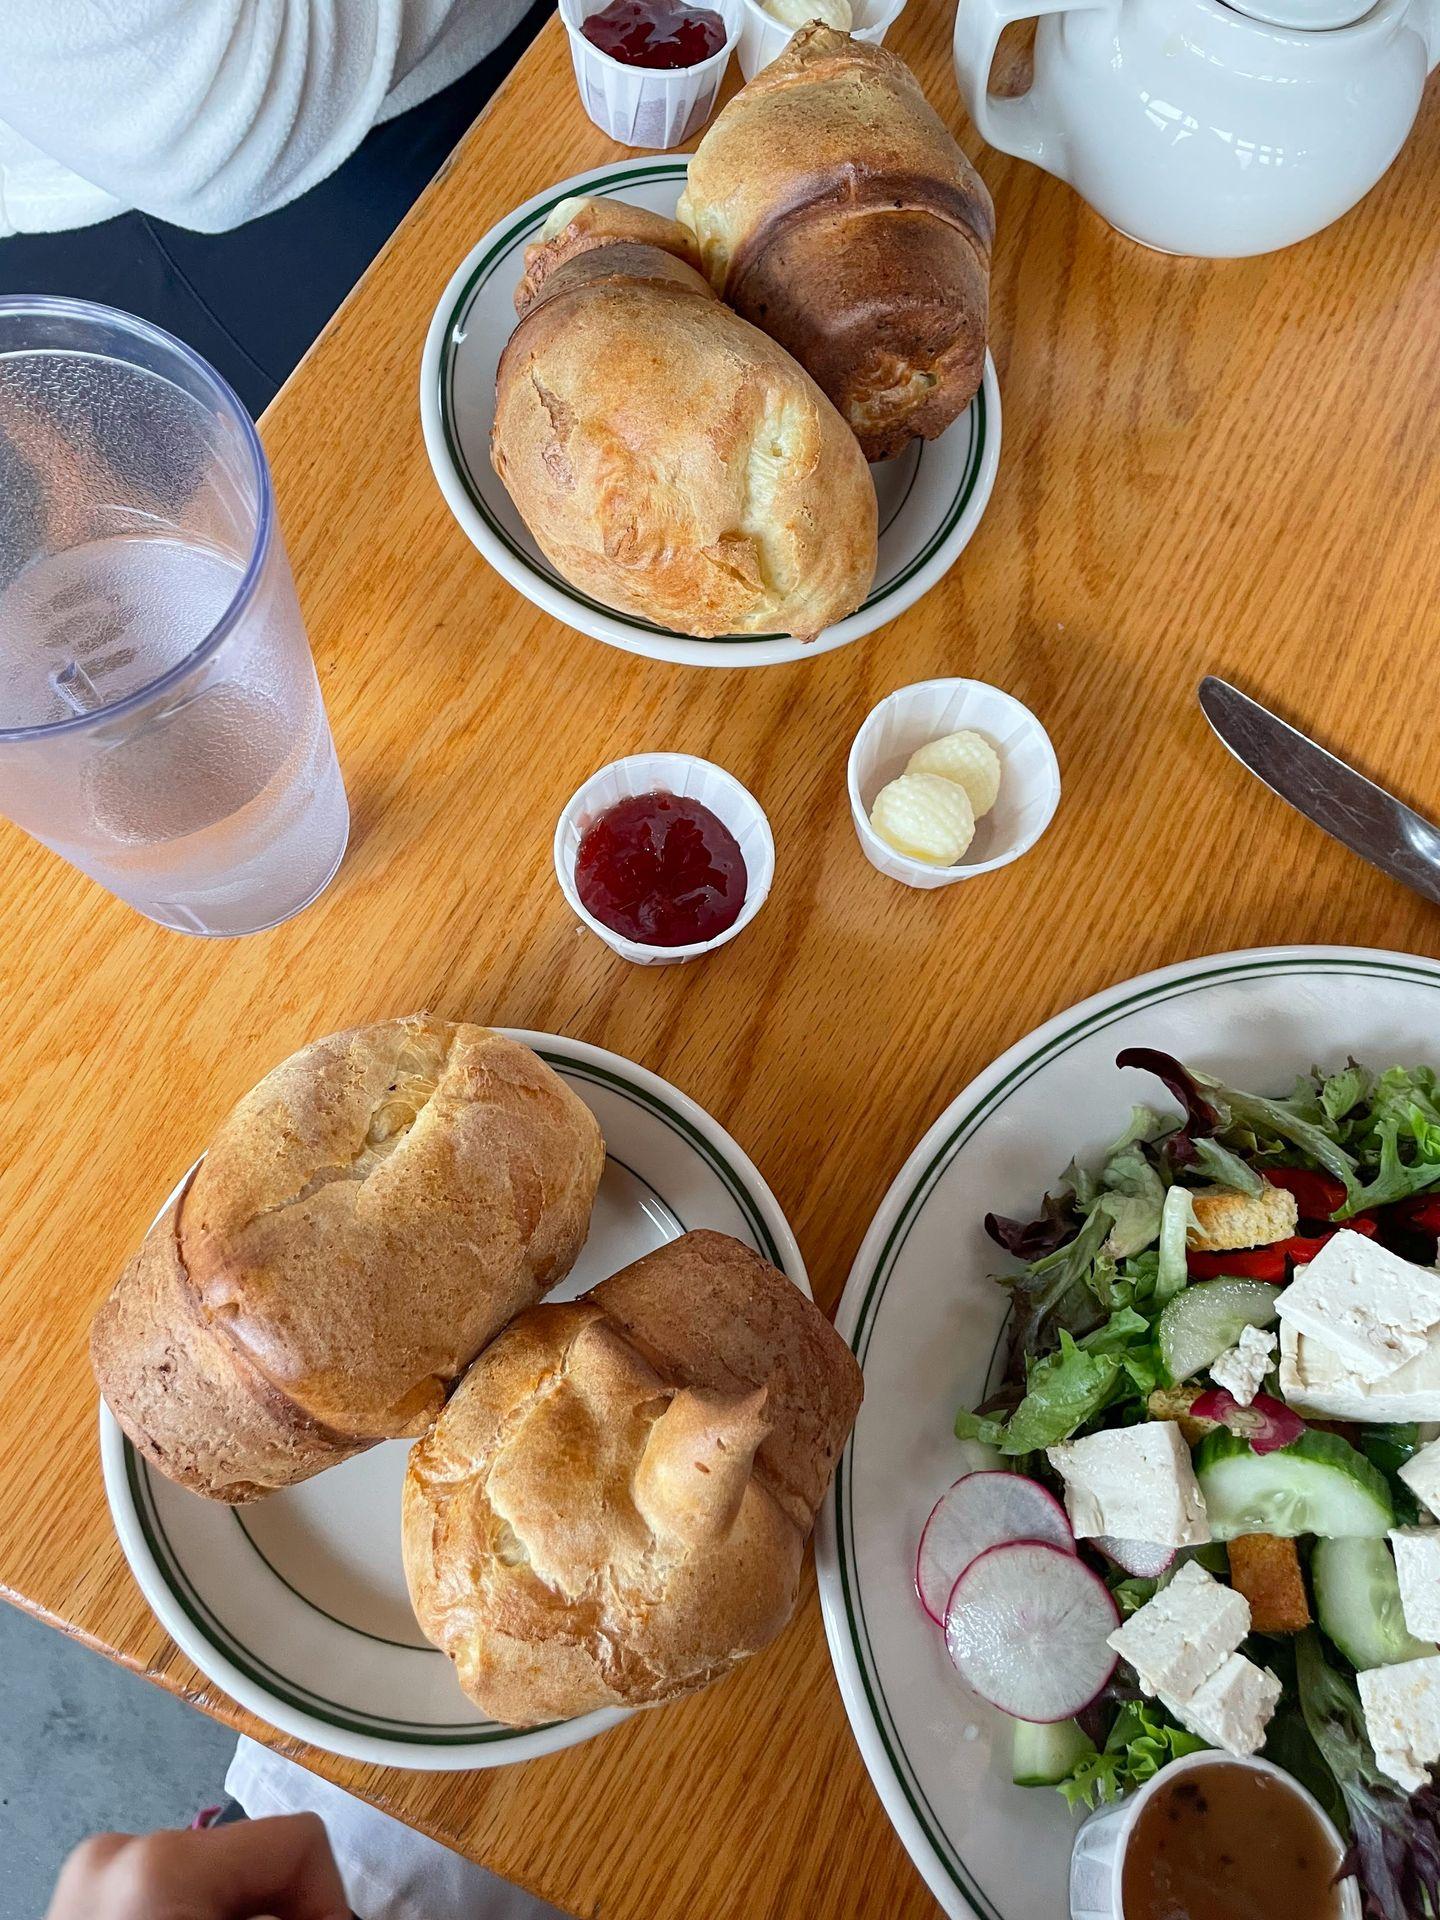 Two plates of popovers and a salad from Jordan Pond House.